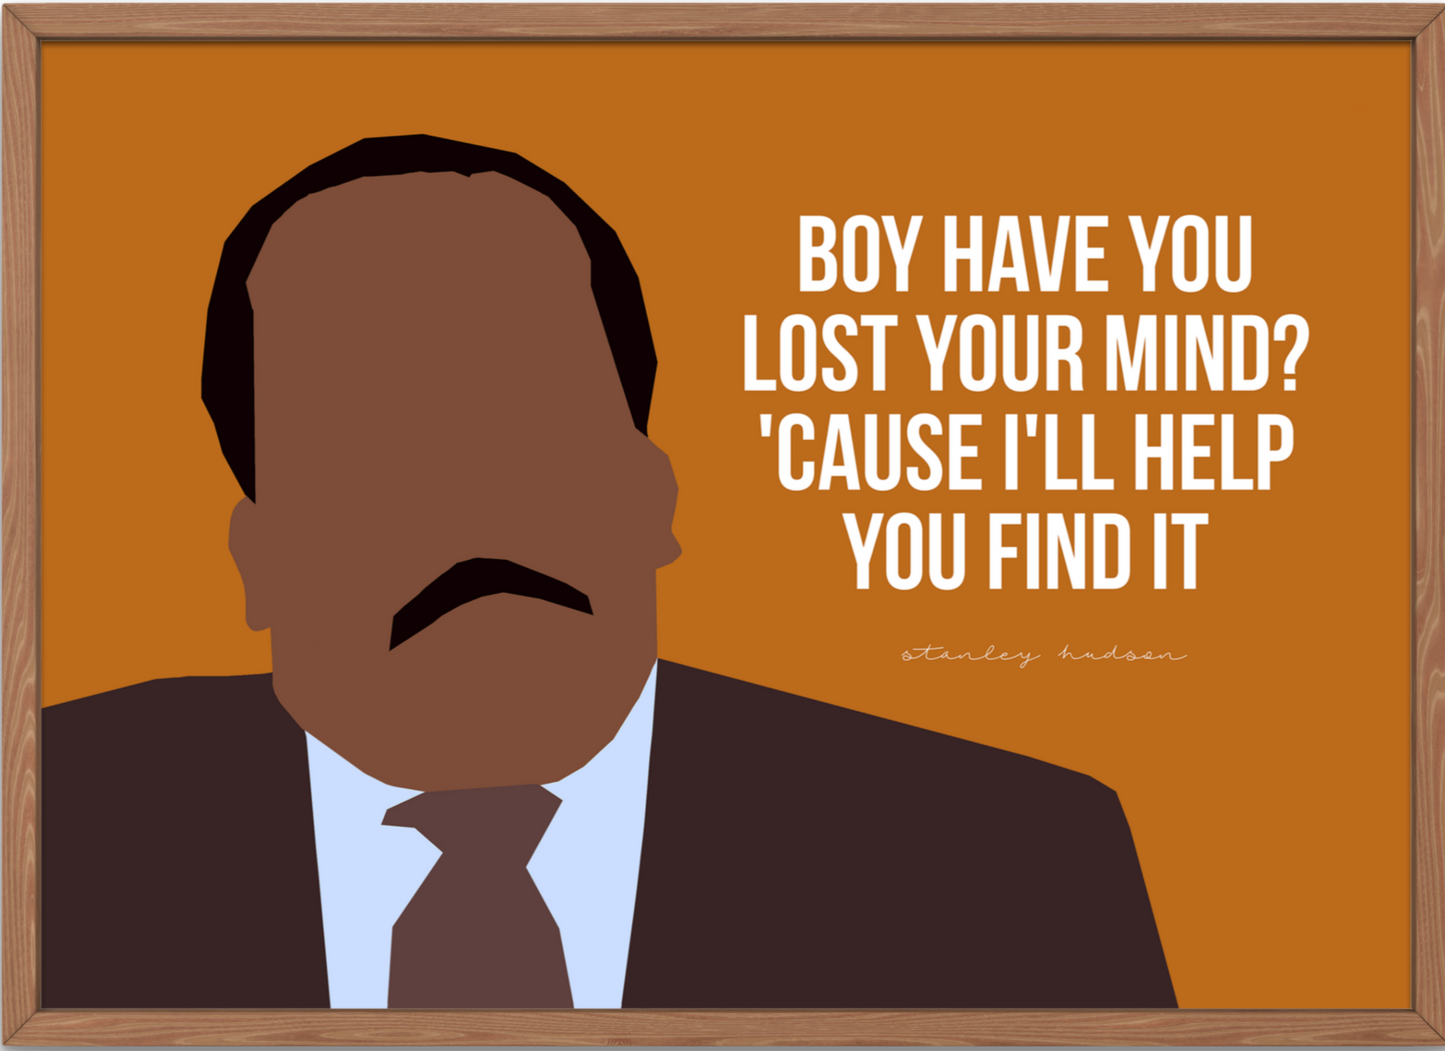 The Office Poster | Stanley Hudson "Have You Lost Your Mind?"